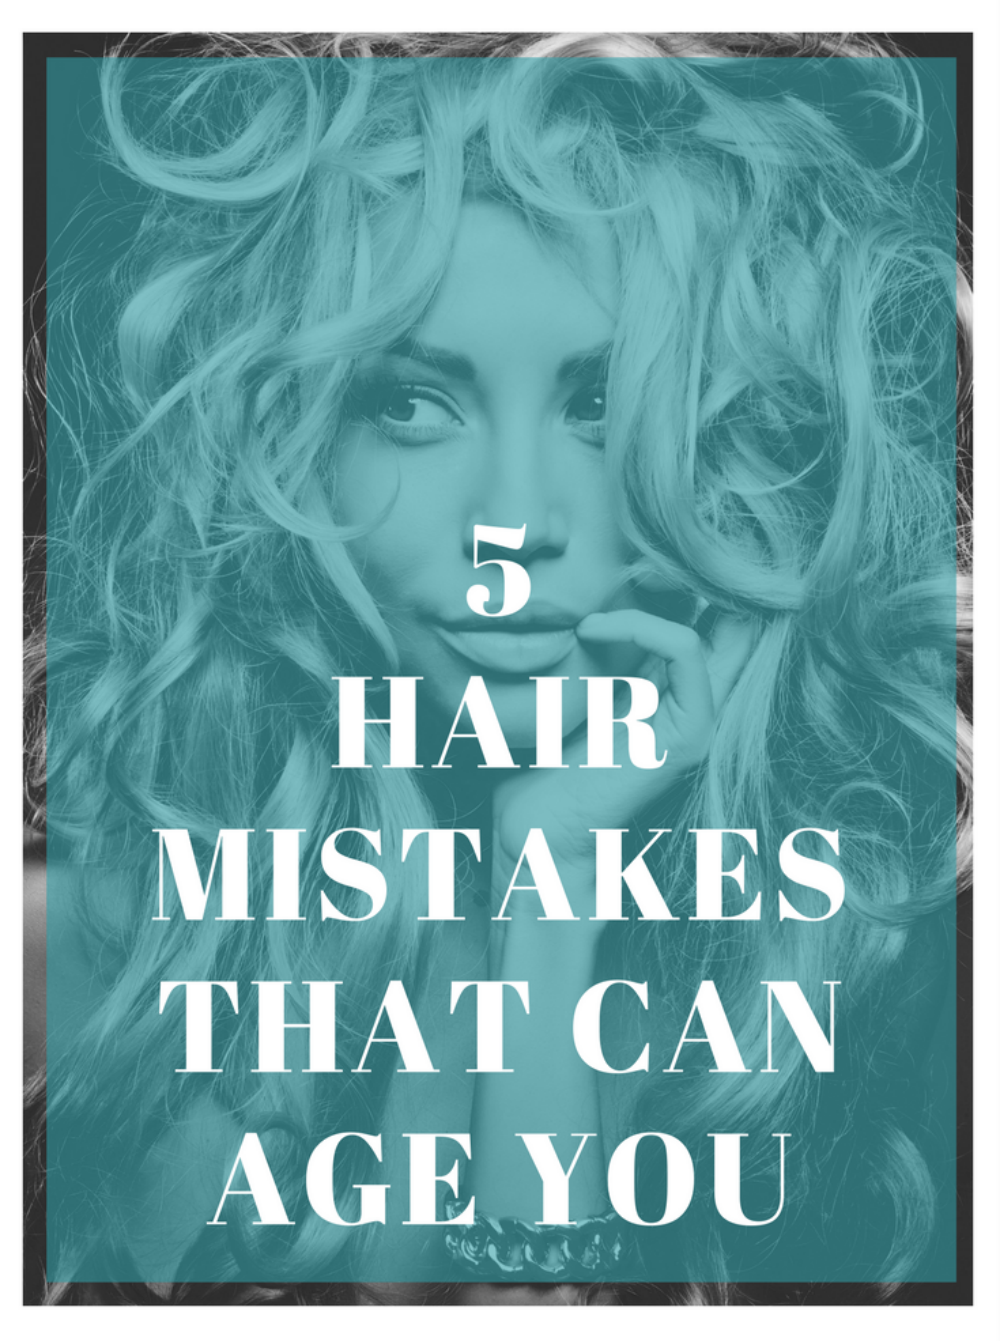 5 Hair Mistakes That Can Age You